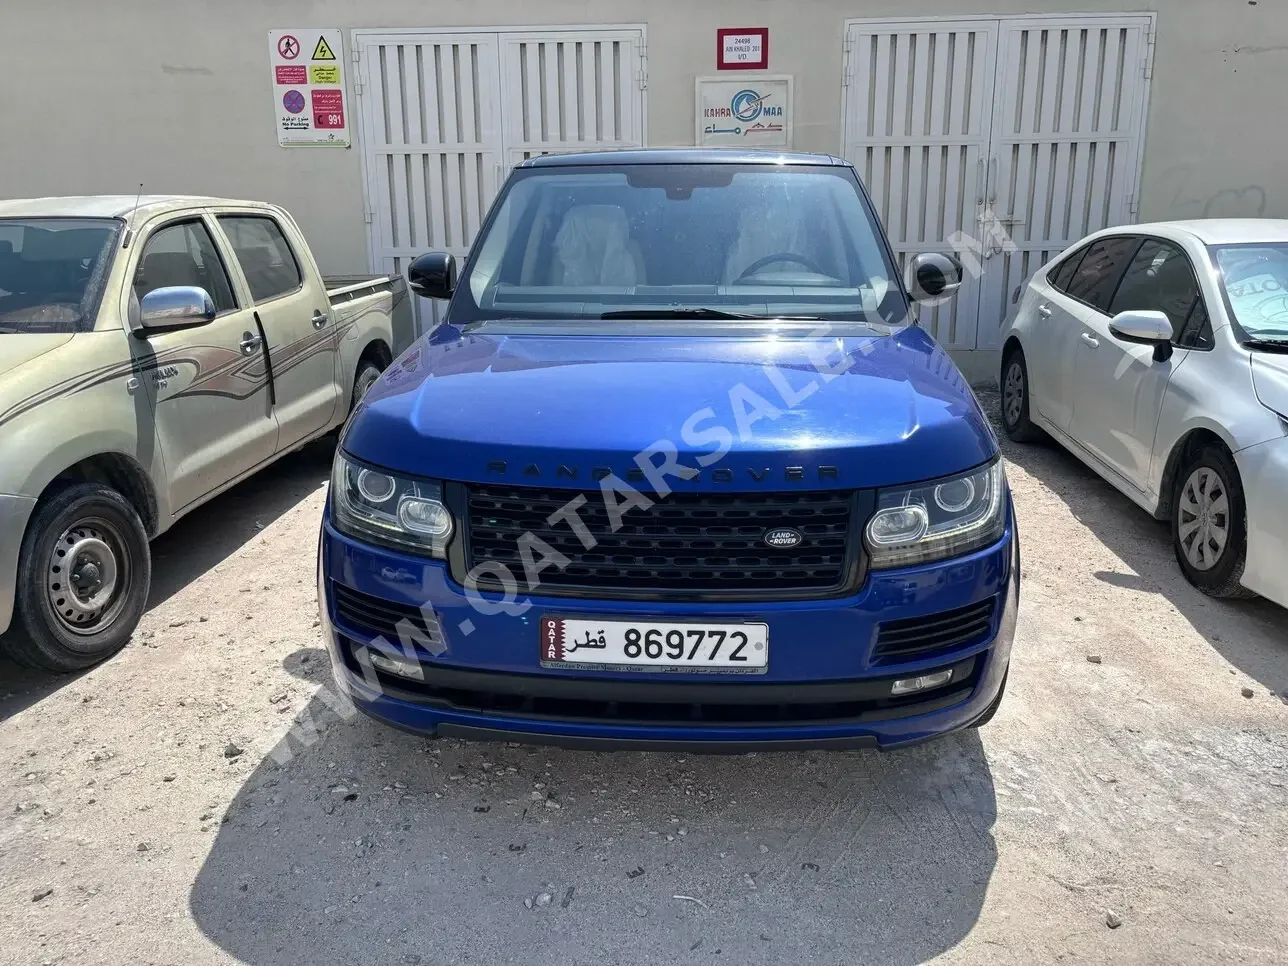 Land Rover  Range Rover  Vogue  2014  Automatic  165,000 Km  8 Cylinder  Four Wheel Drive (4WD)  SUV  Blue